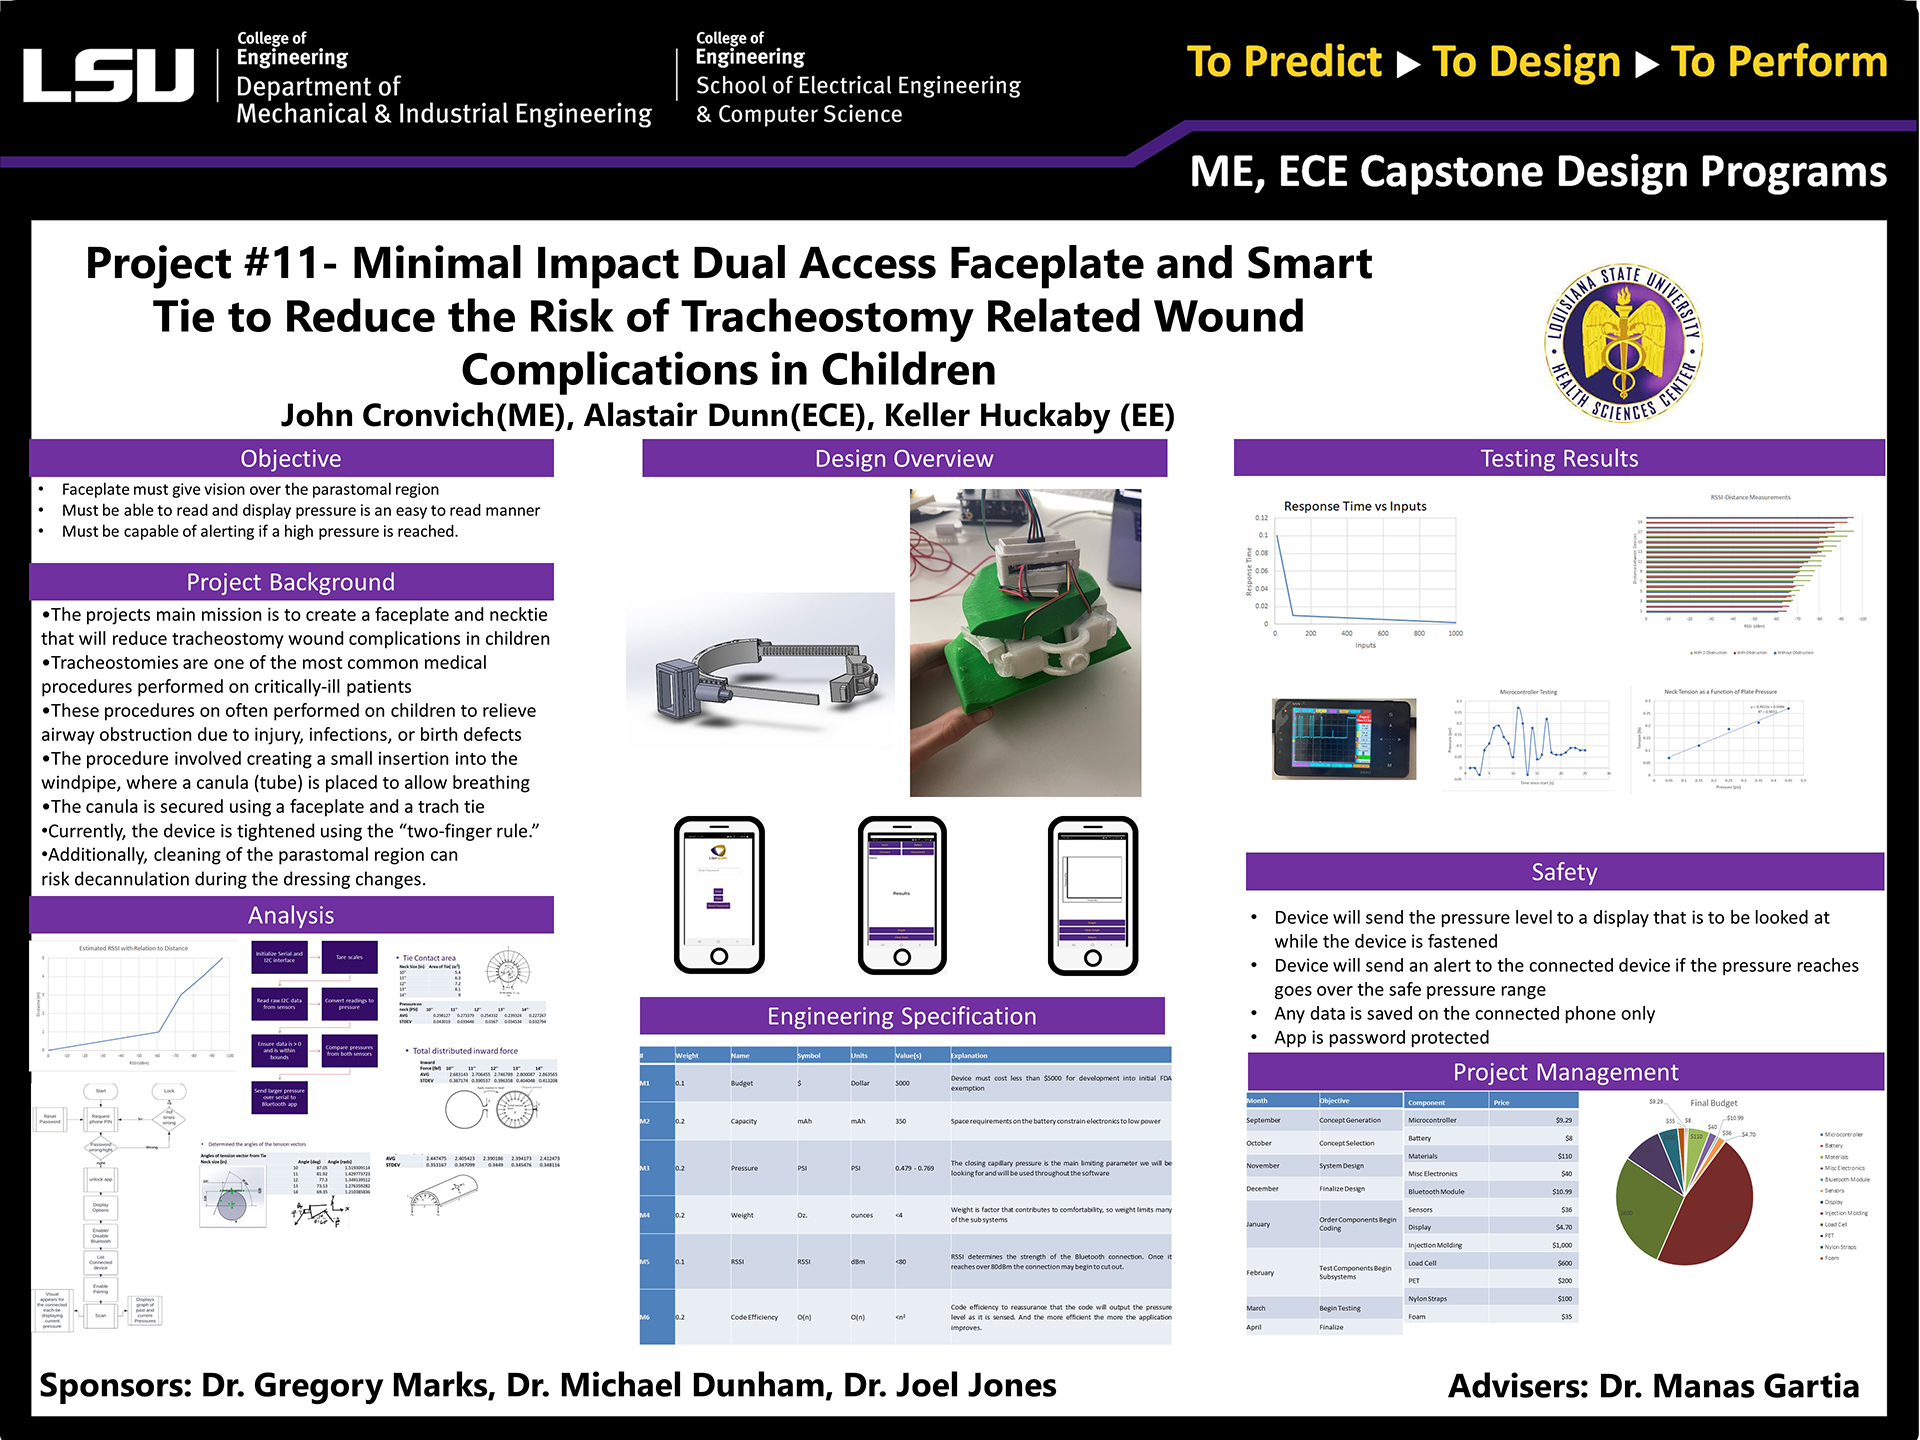 Project 11: Minimal Impact Dual Access Faceplate and Smart Tie to Reduce the Risk of Tracheostomy Related Wound Complications in Children (2022)